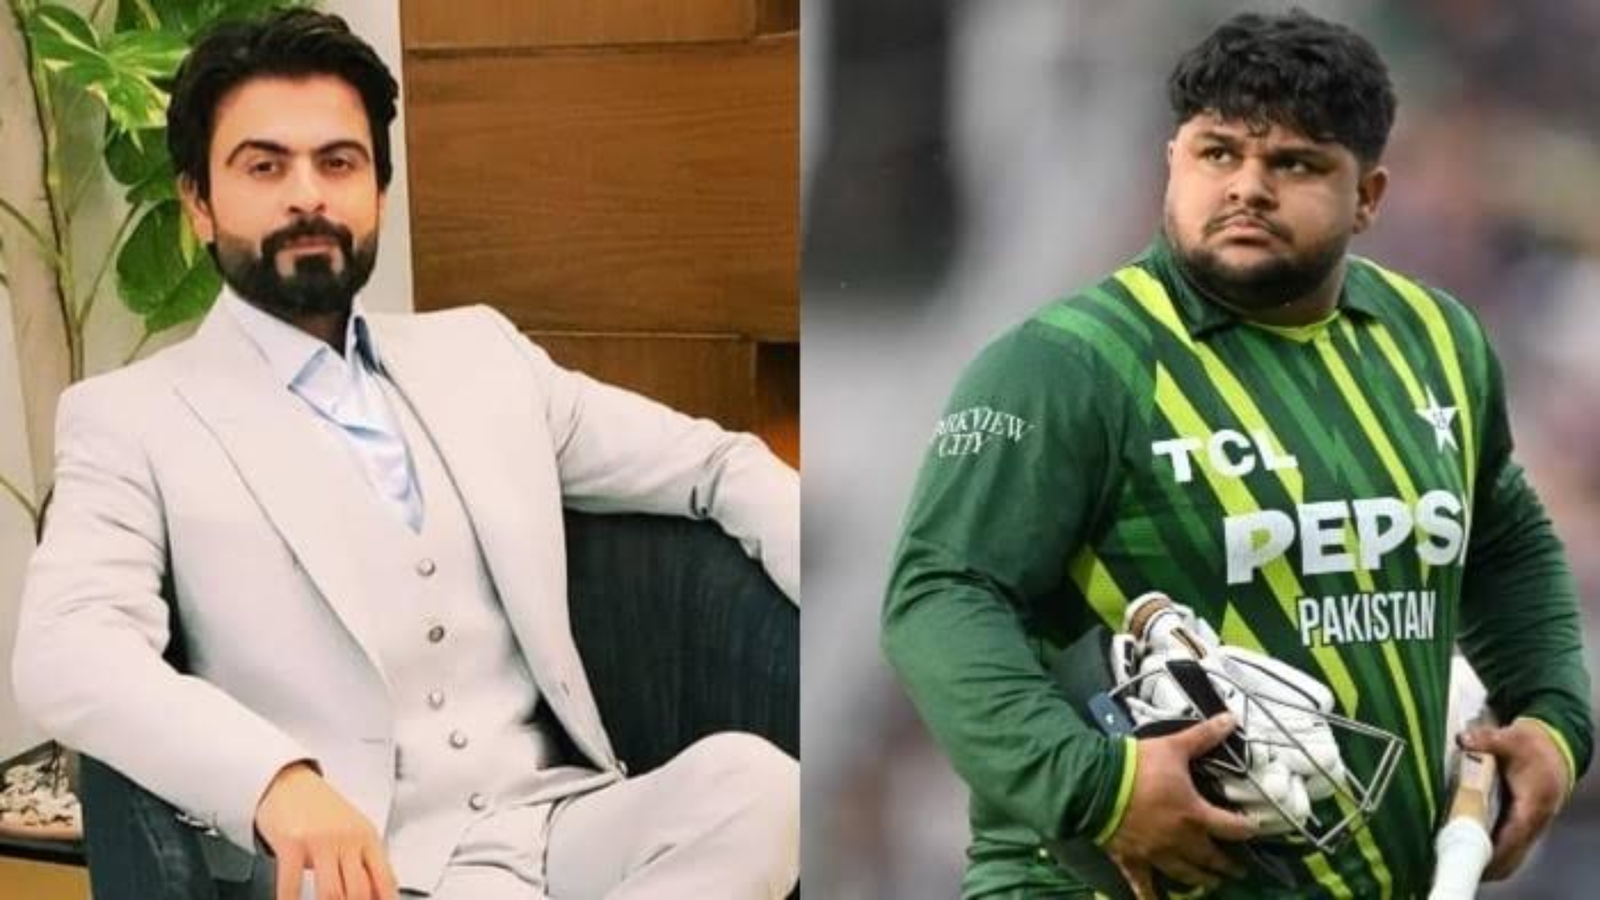 Ahmad Shahzad condemns body shaming, stands up for Azam Khan